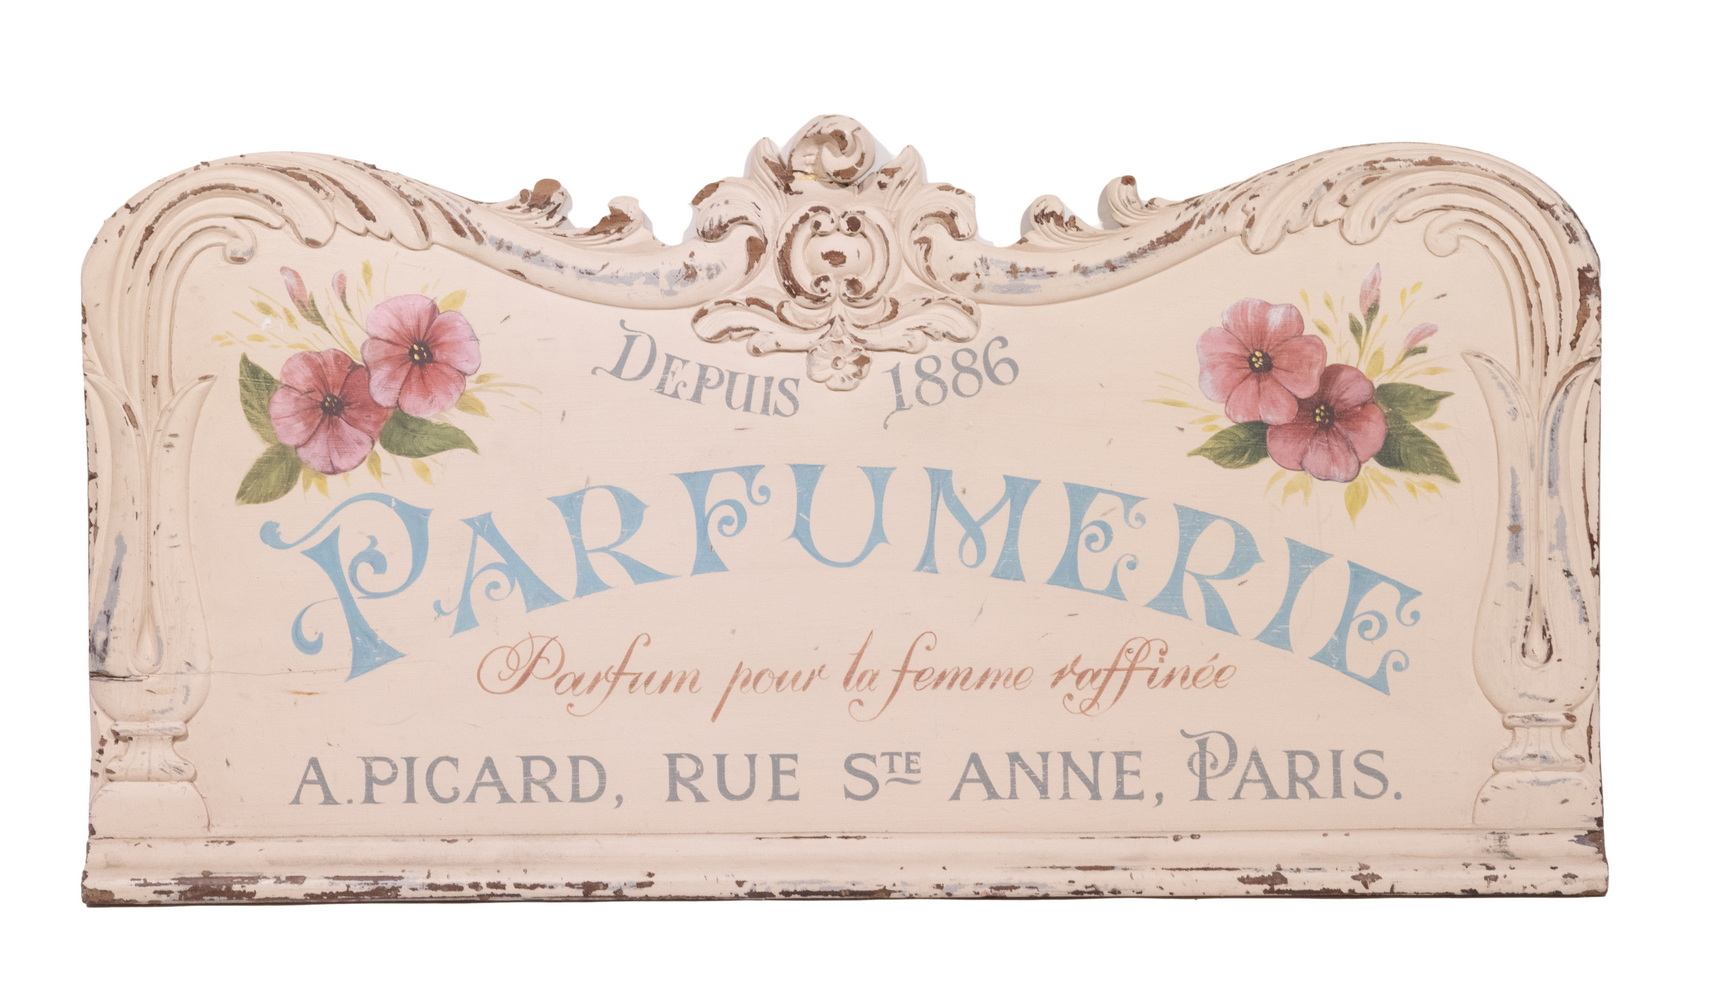 FRENCH PERFUME ADVERTISING SIGN